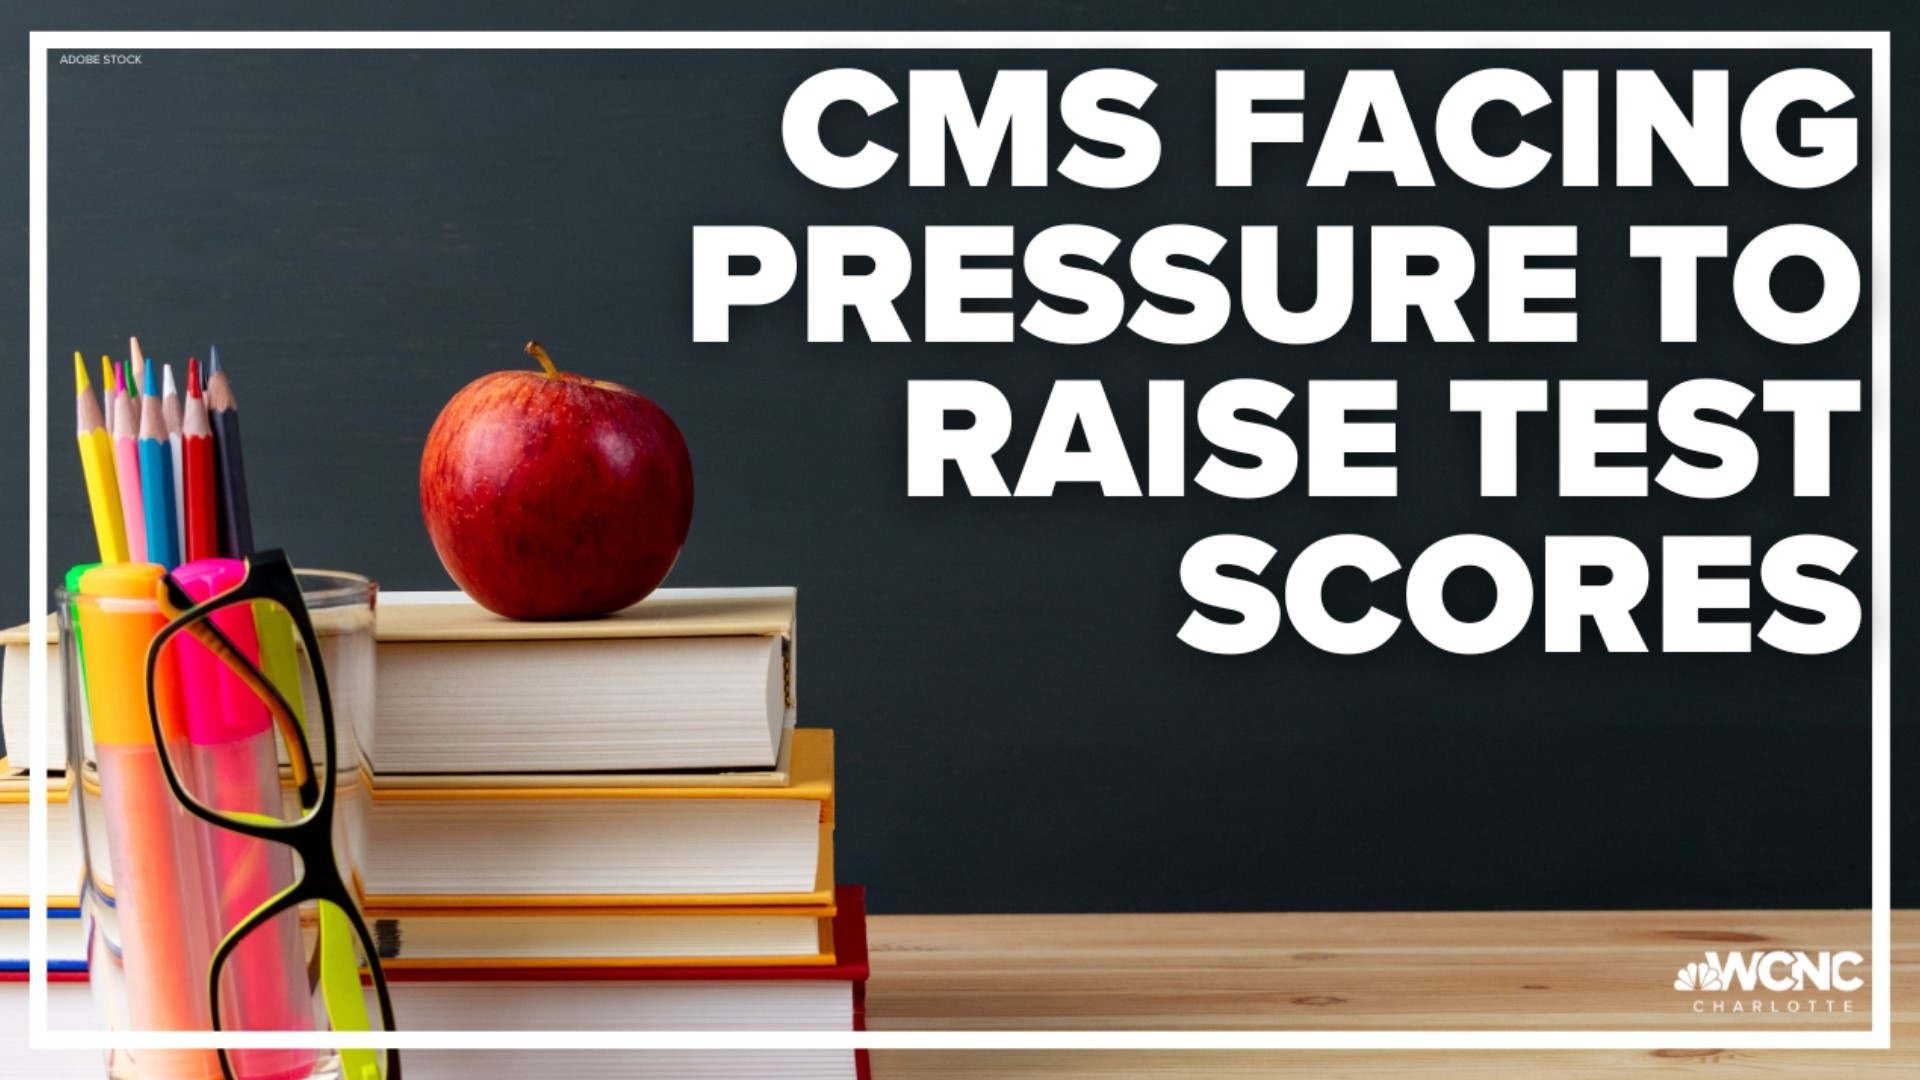 For CMS, improving test scores is high on the priority list.